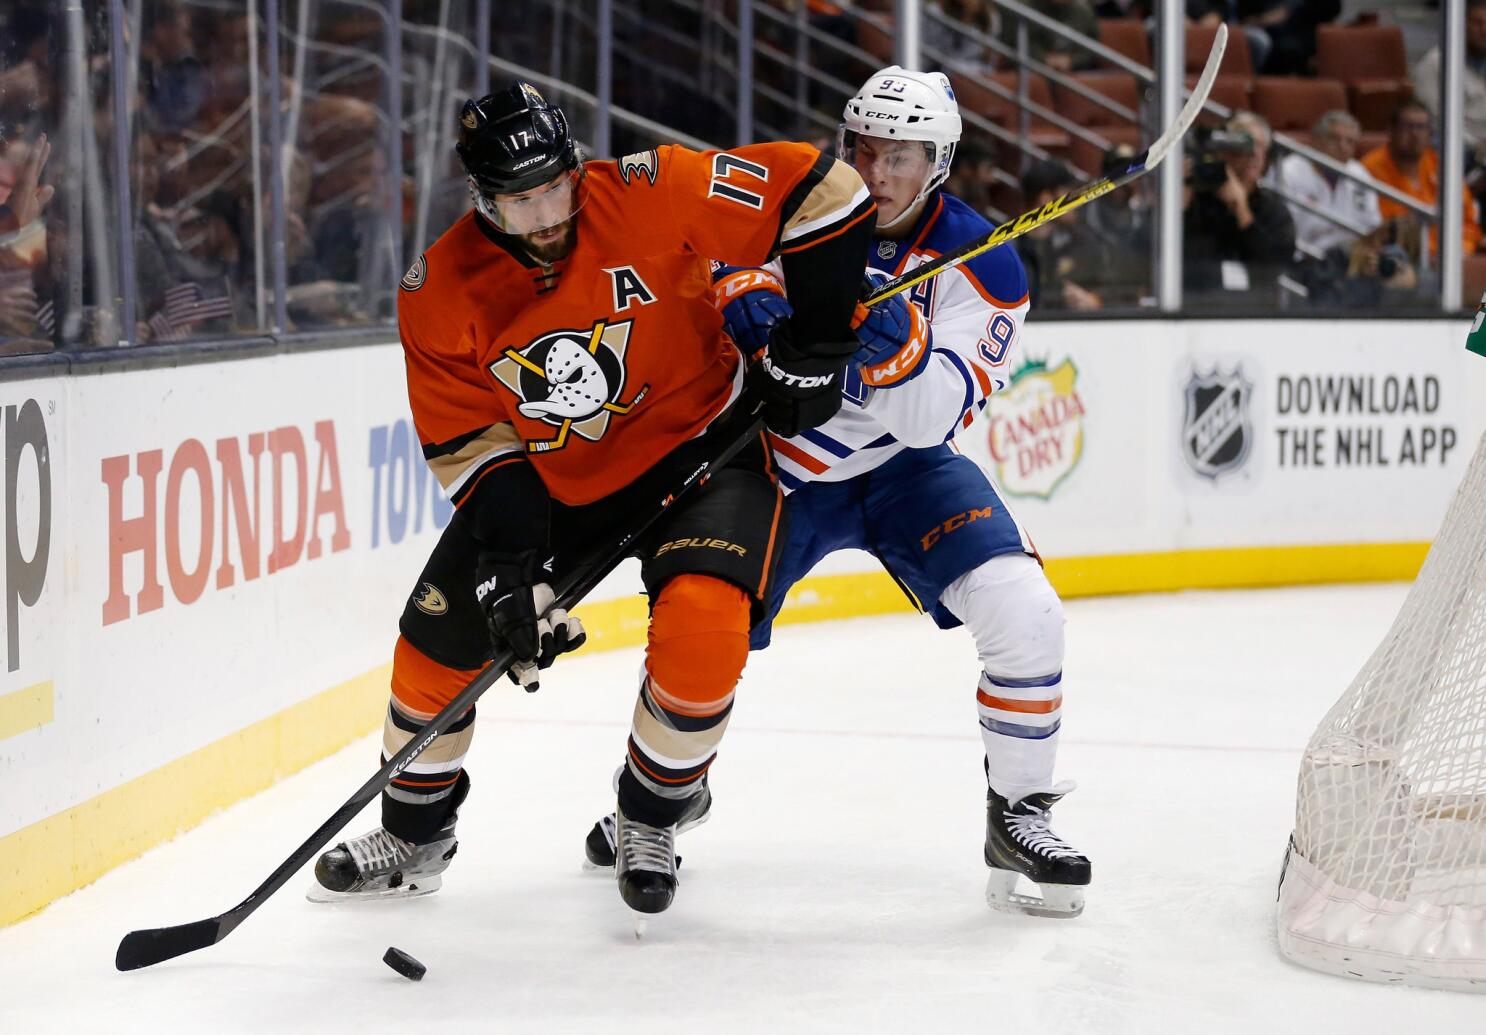 Edmonton Oilers: Nugent-Hopkins Will Have to Battle Salary Cap